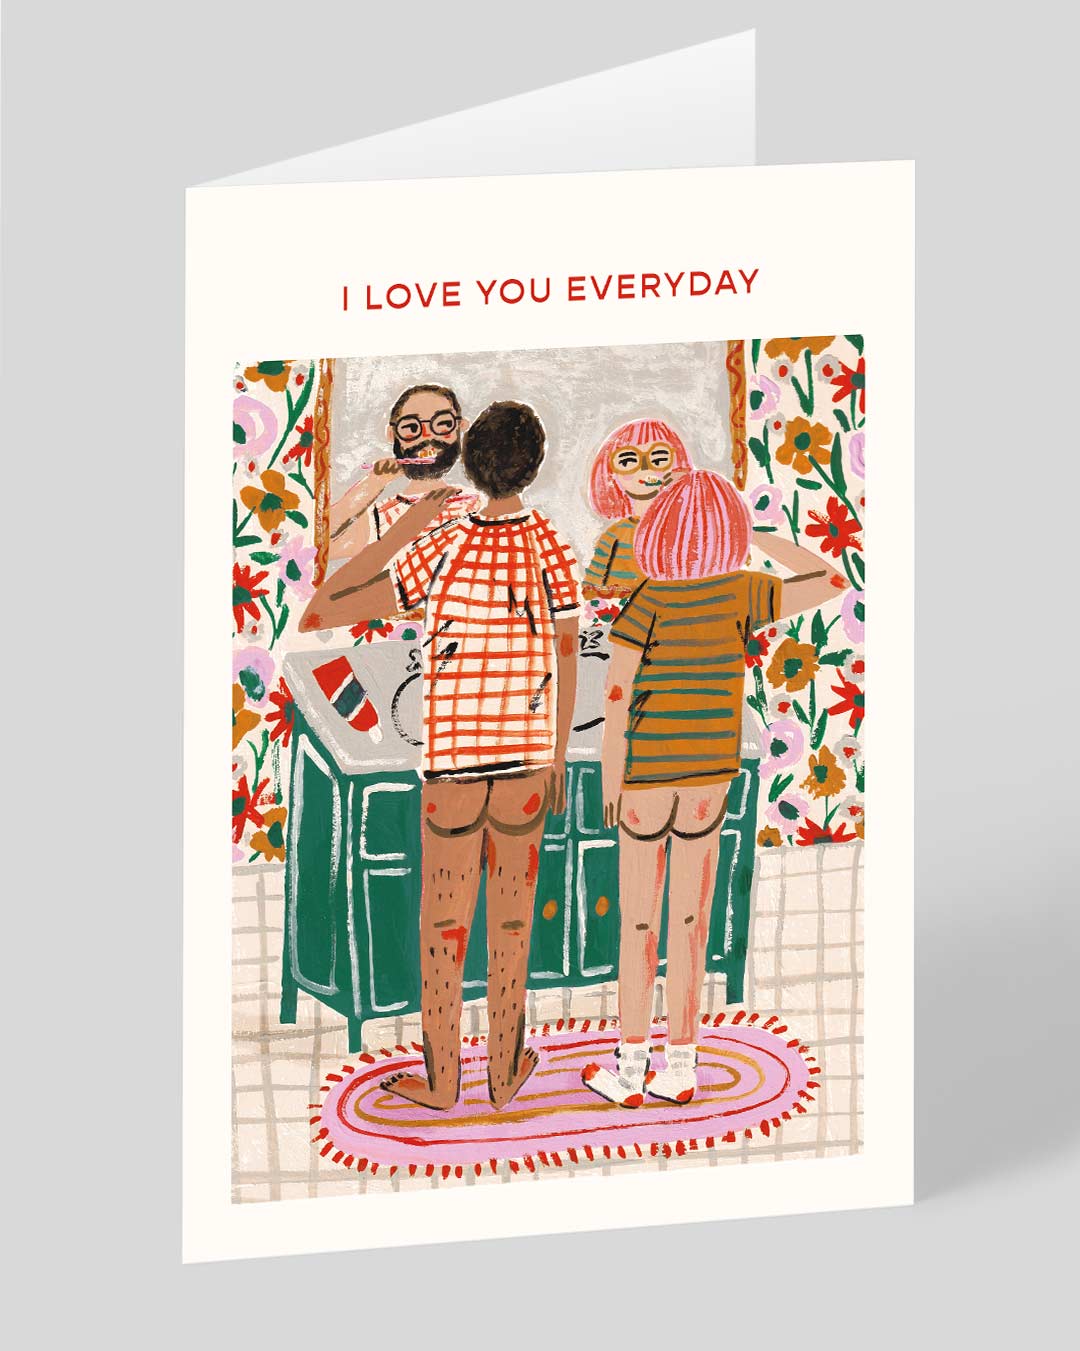 Valentine’s Day | Funny Valentines Card For Him or Her | Personalised Bathroom Couple Card | Ohh Deer Unique Valentine’s Card | Artwork by Emily Doliner | Made In The UK, Eco-Friendly Materials, Plastic Free Packaging